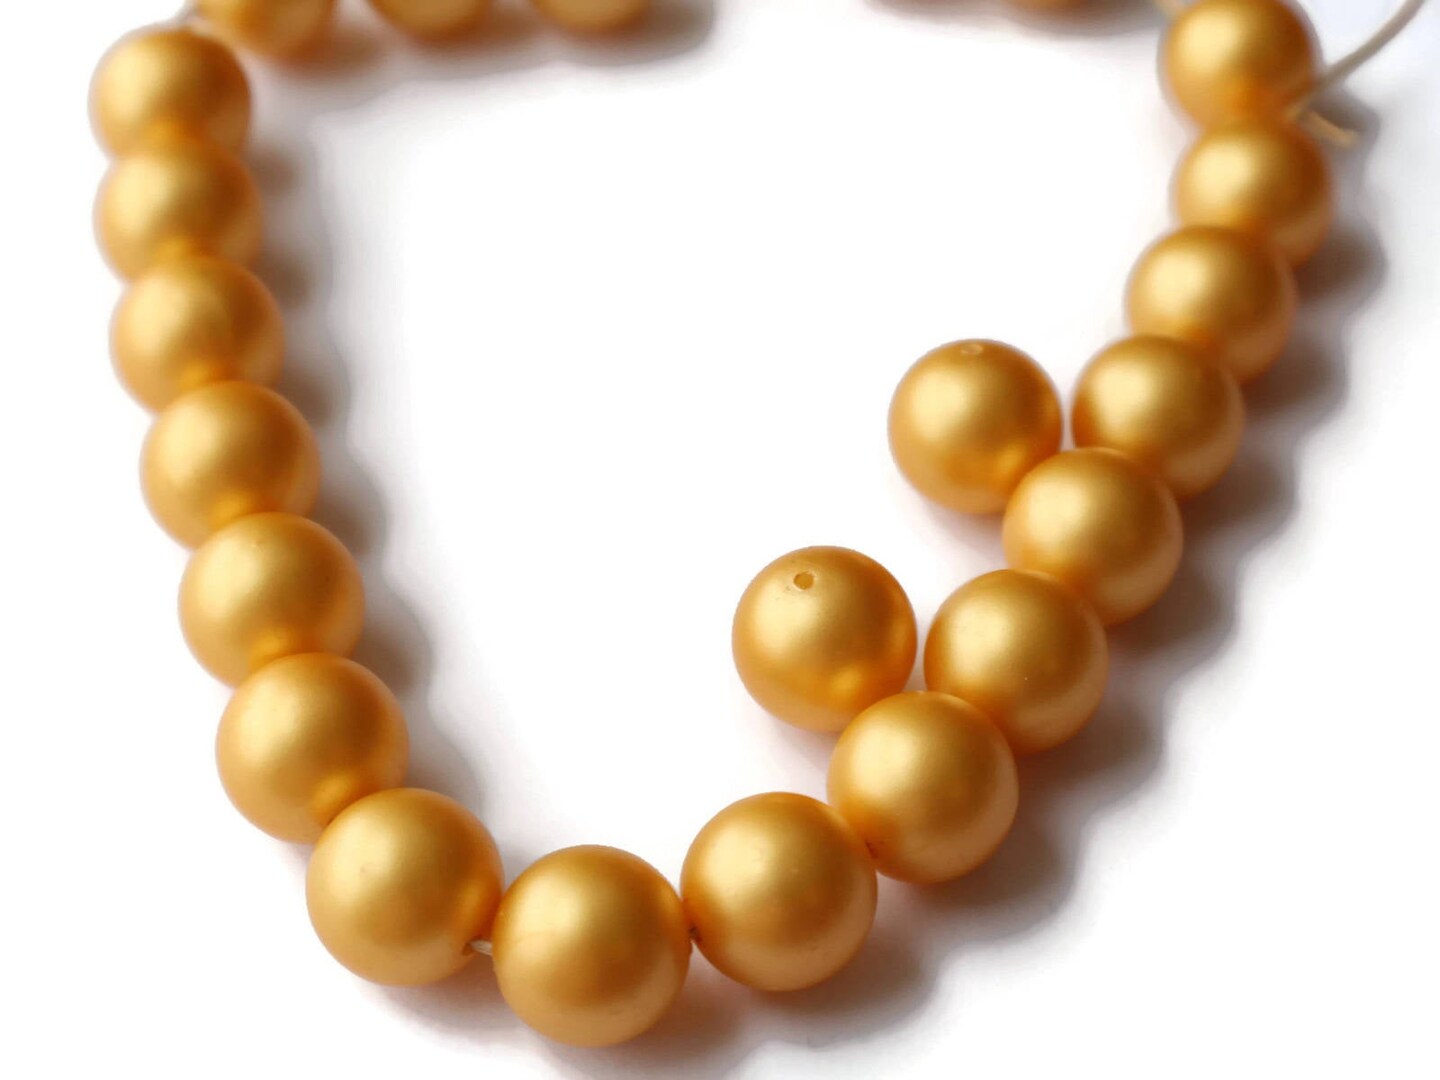 23 14mm Golden Yellow Faux Pearl Beads Vintage New Old Stock Plastic Pearls